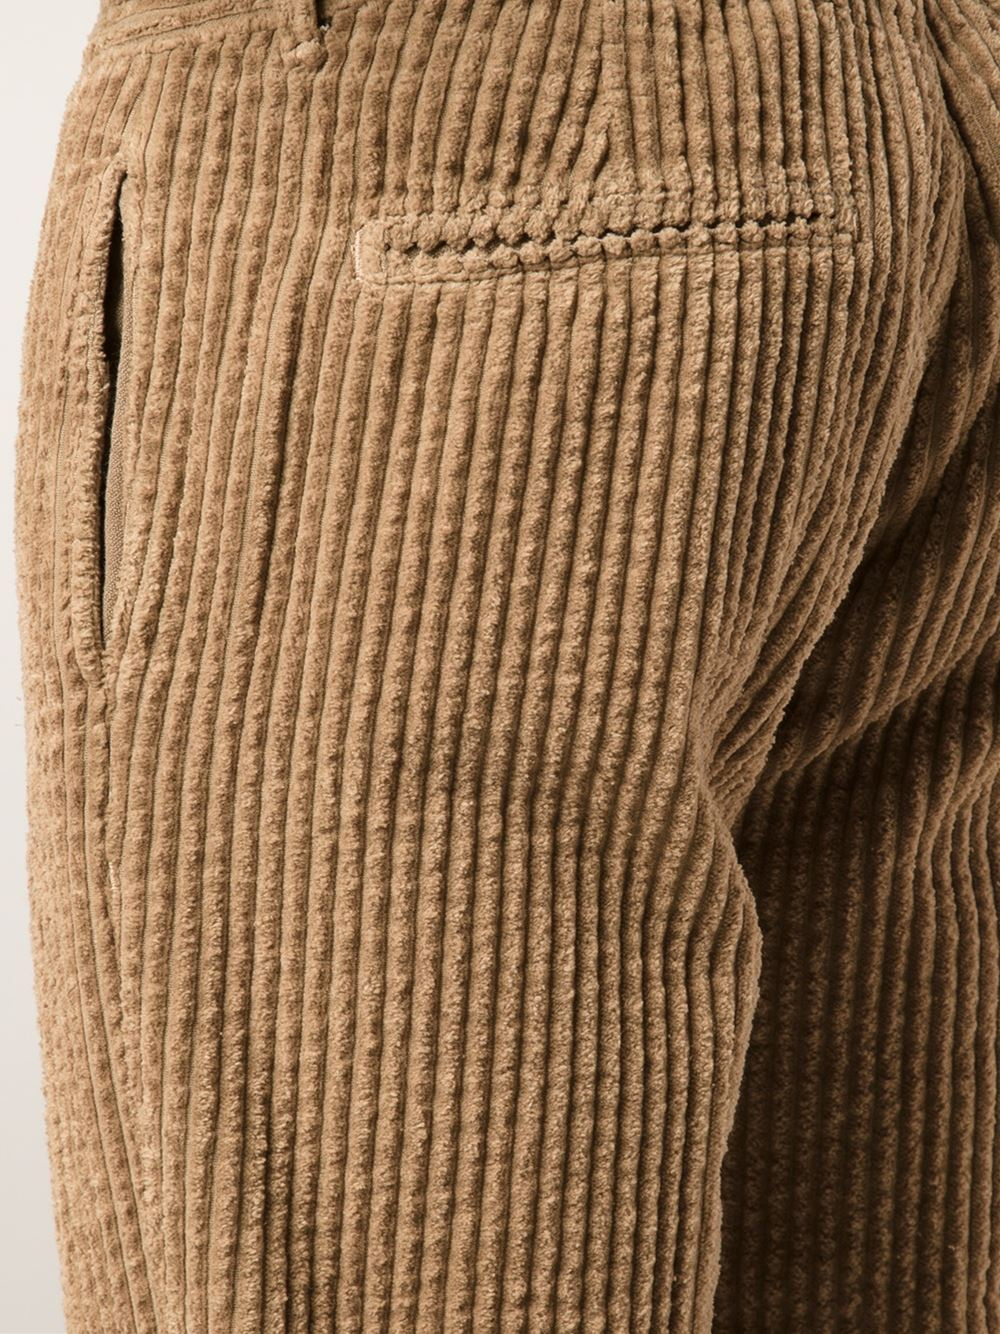 Massimo Alba 'Winch Wide Corduroy' Trousers in Natural for Men - Lyst